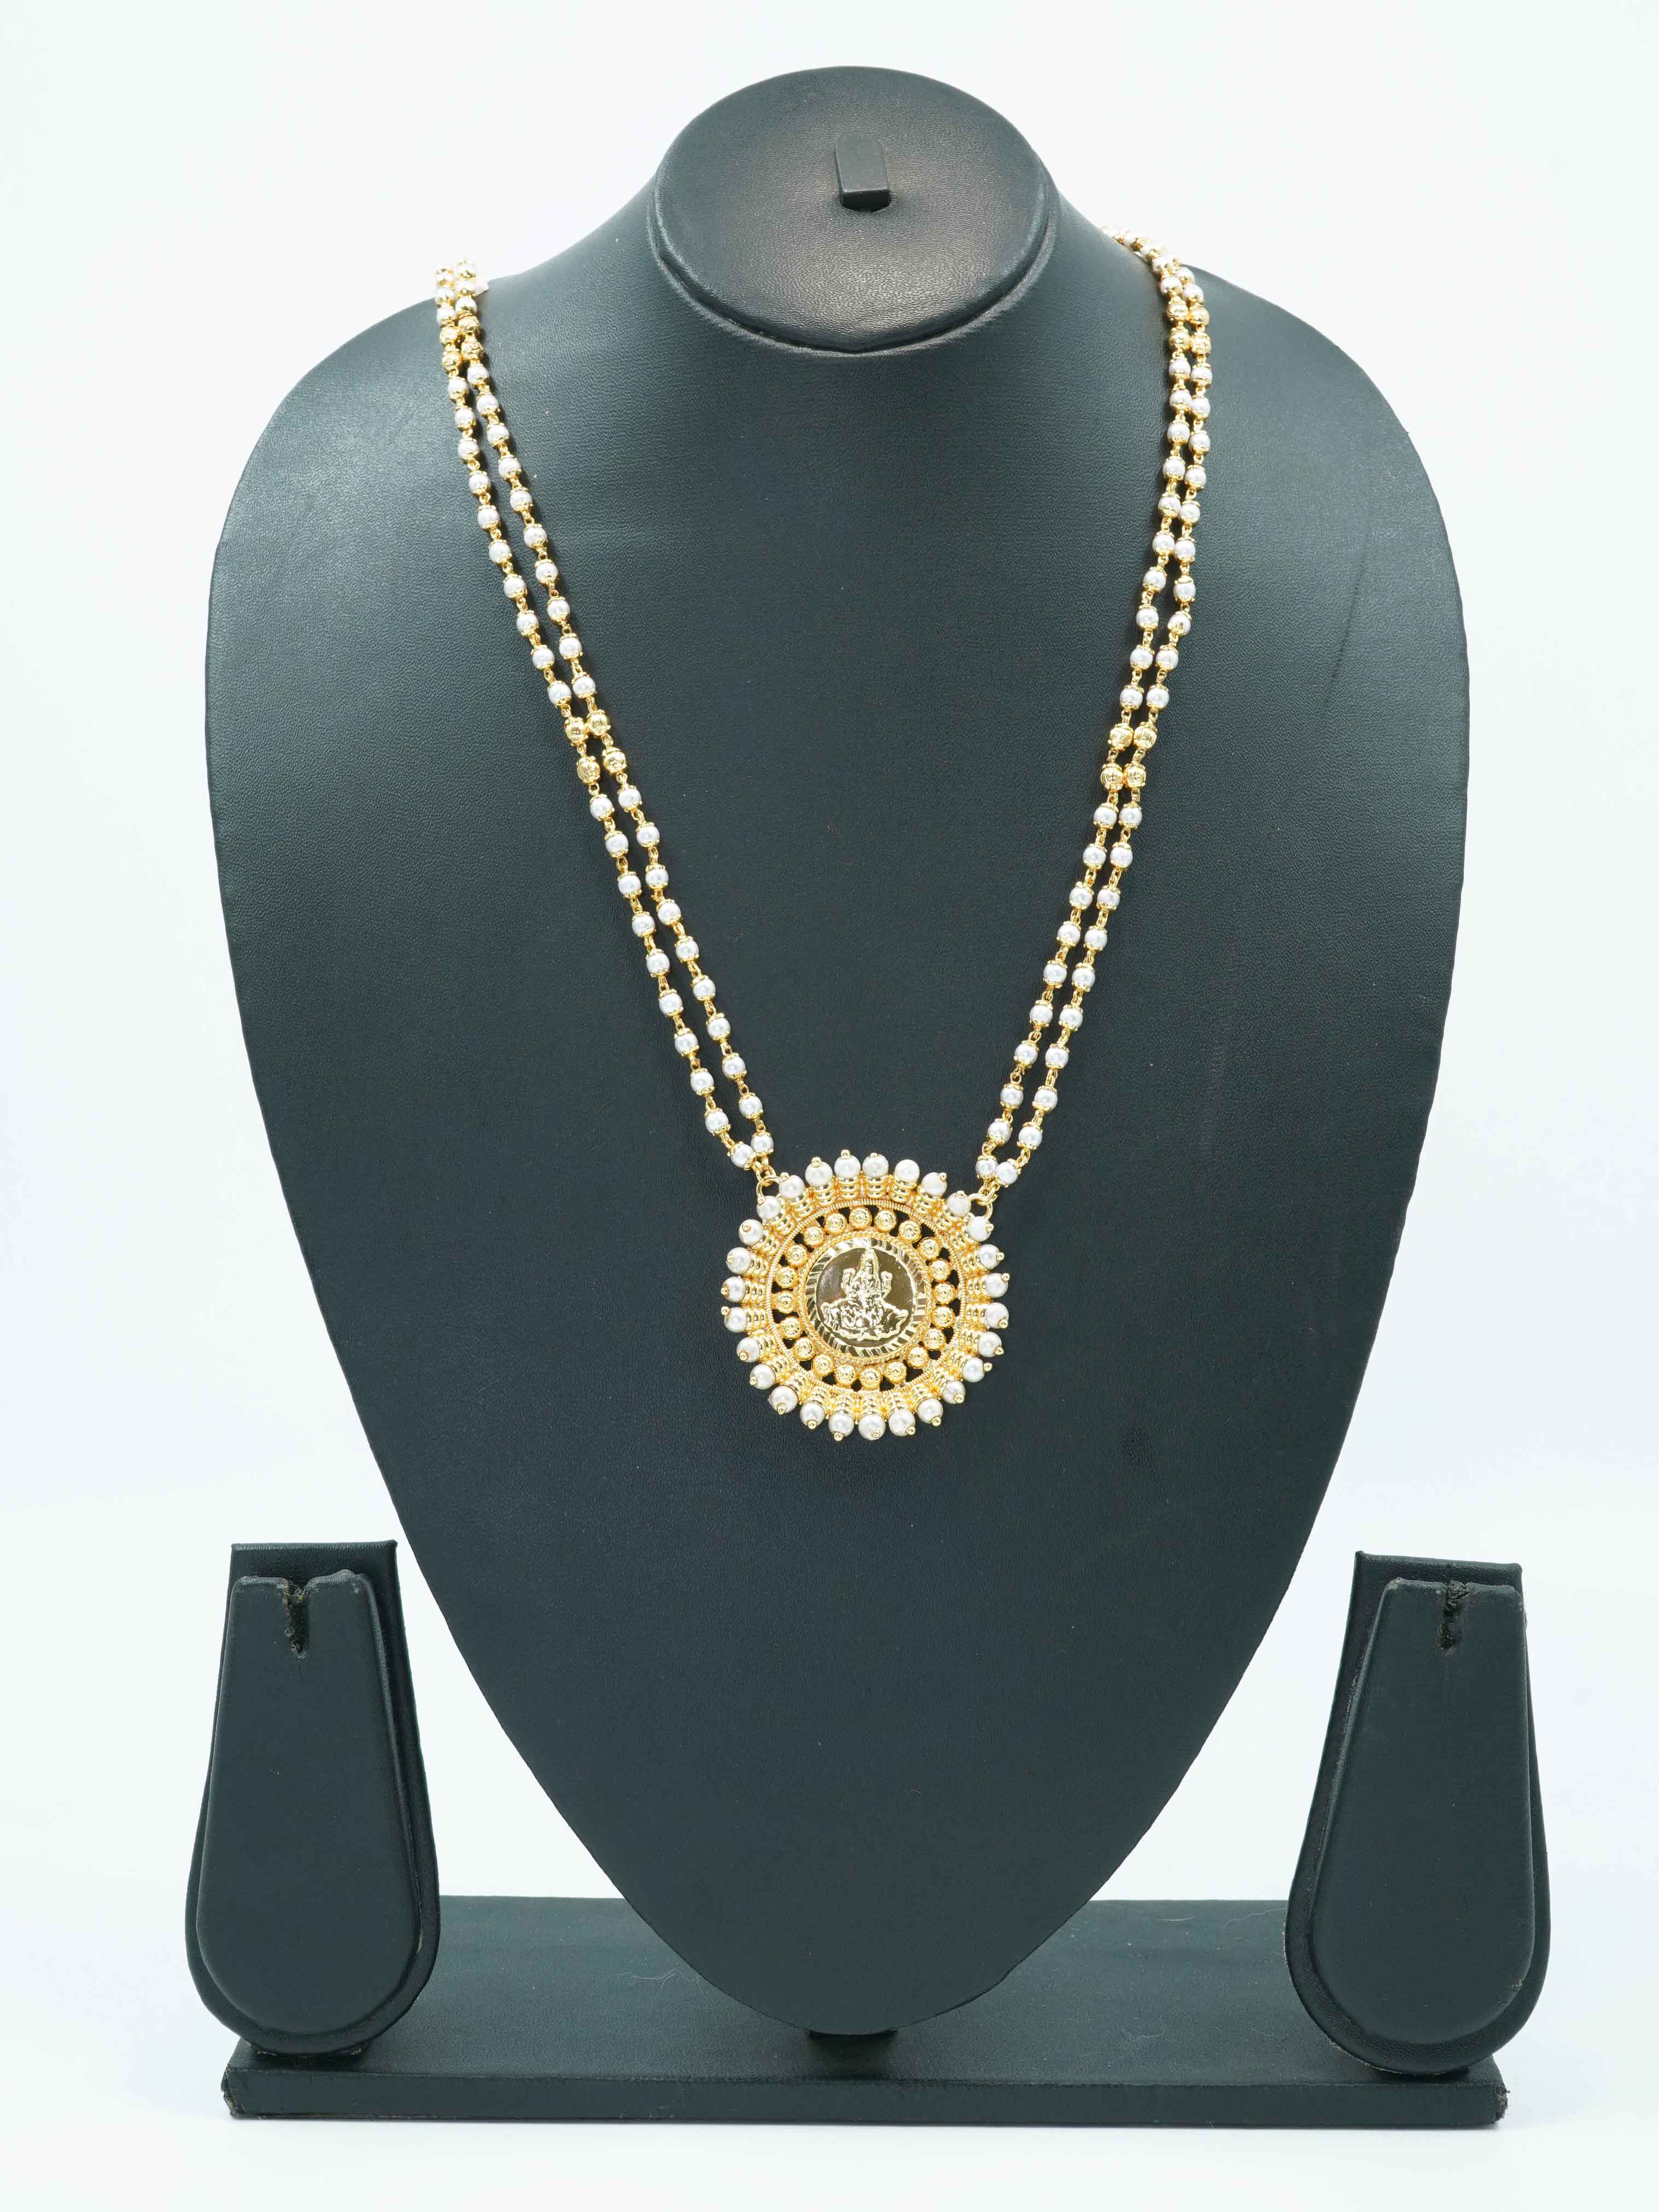 1 gm Micro gold plated 2 Line designer 24 inches chain with Pearl beads and laxmi dollar/Pendant 10624N